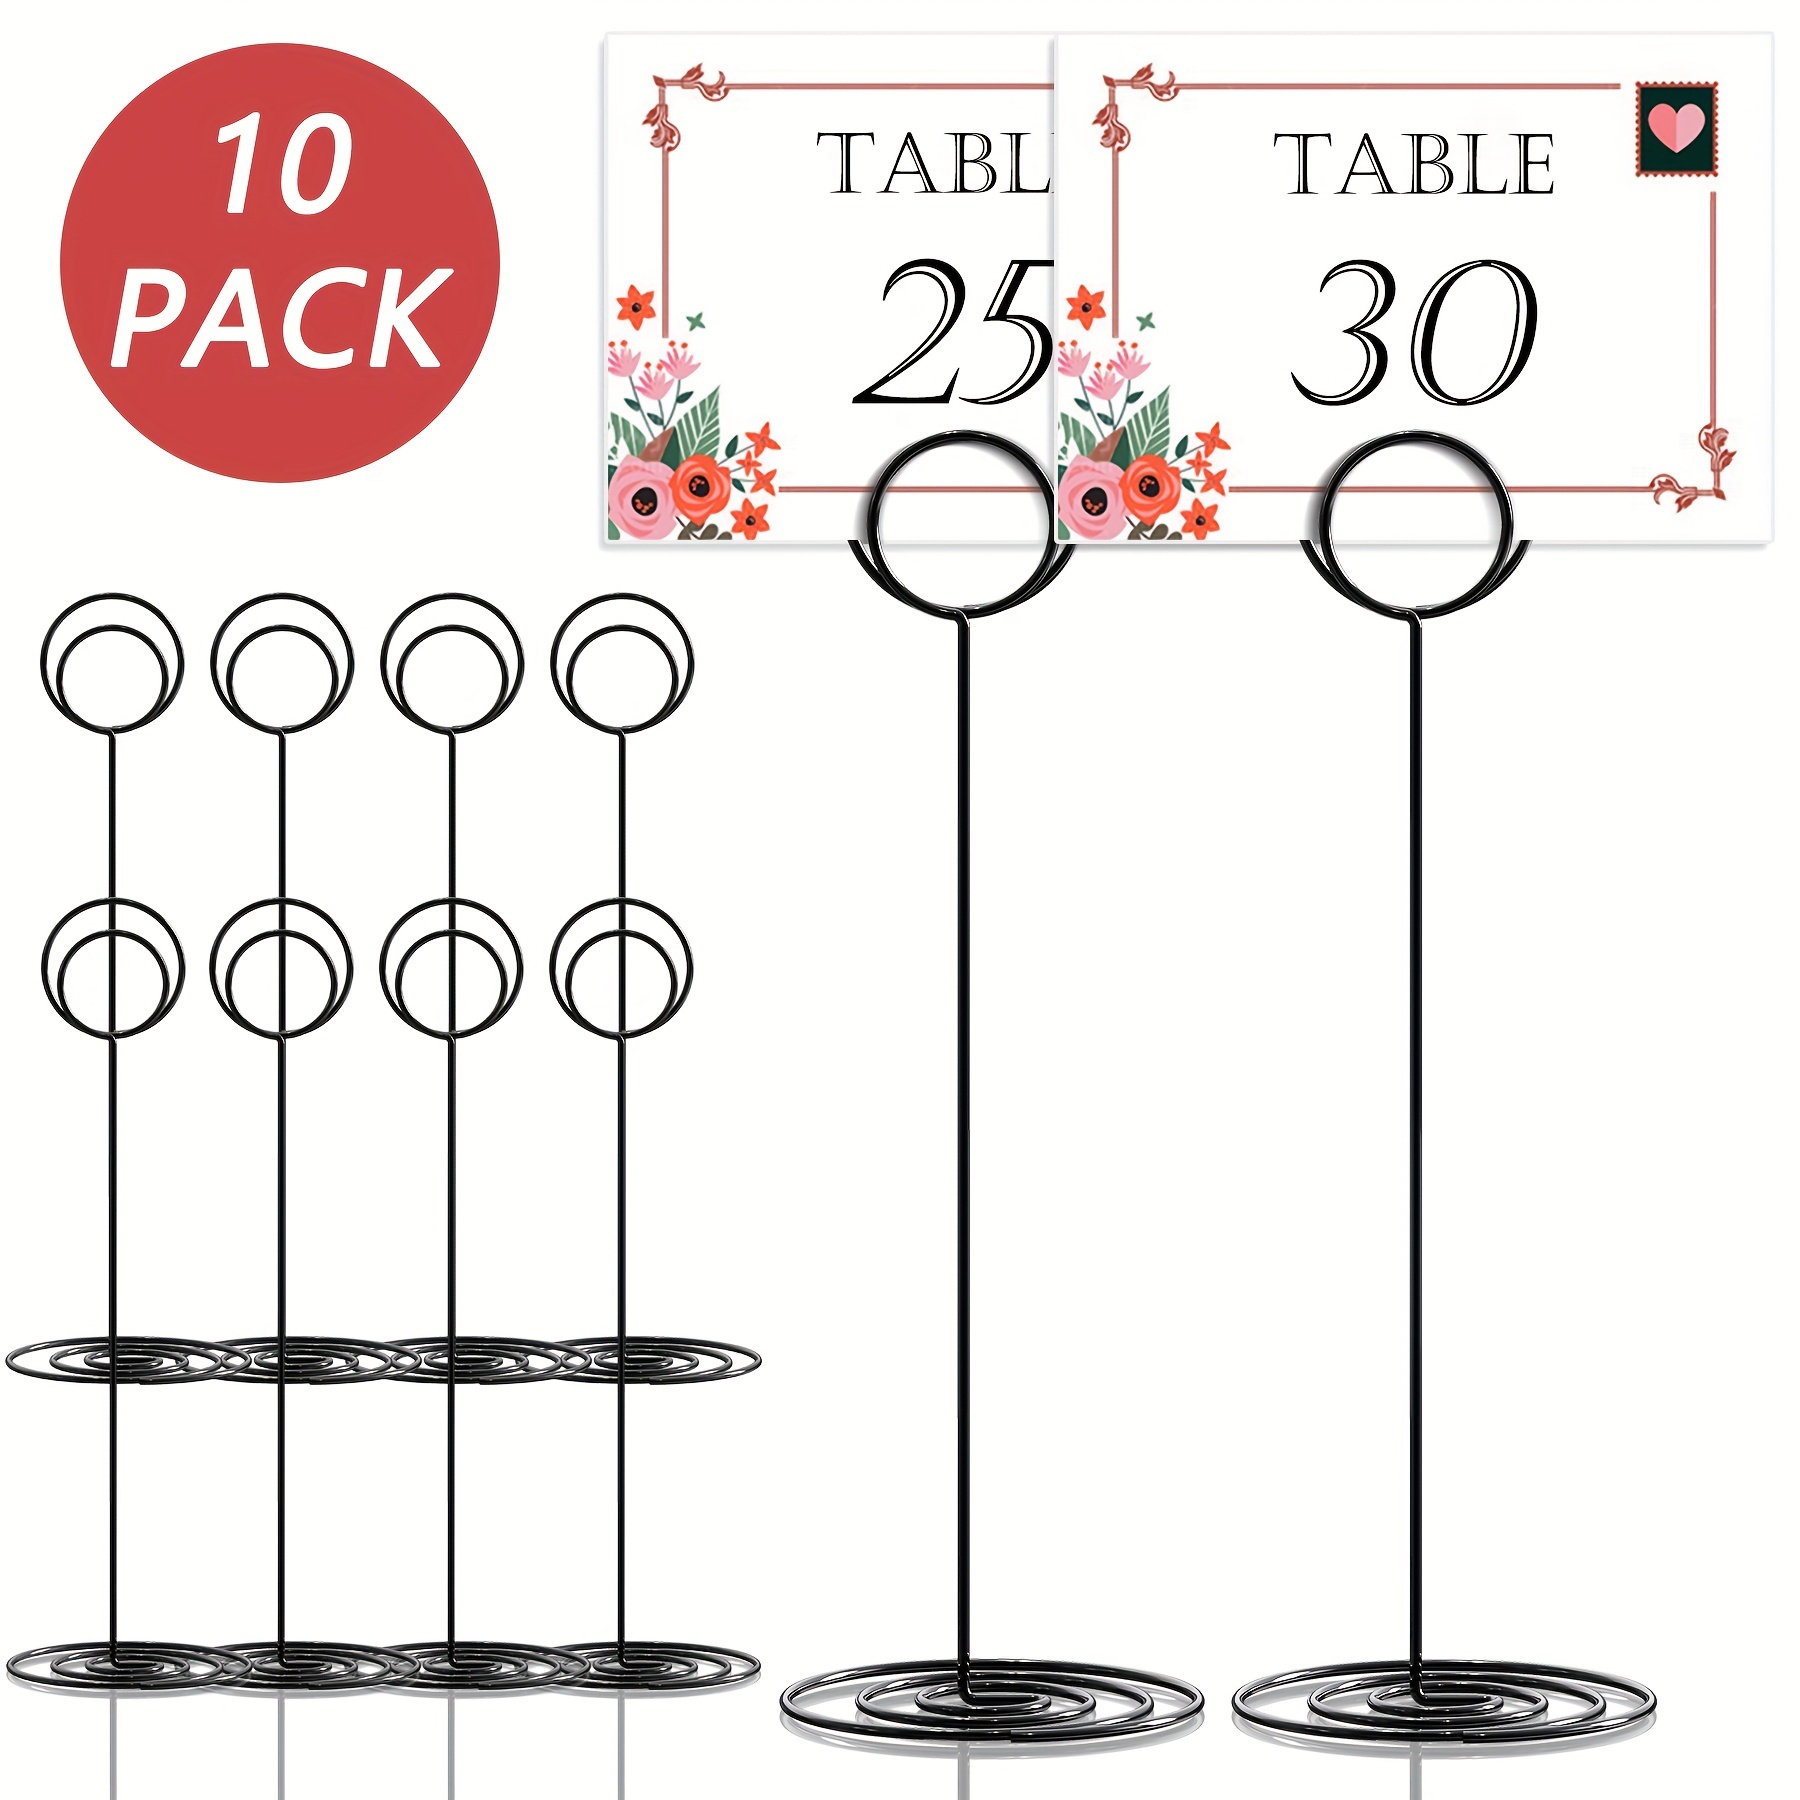 

10pcs 8.75 Inch/22 Cm Tall Table Number Holders - Black Place Card Holder Table Number Stands Photo Holders For Wedding Party Graduation Reception Restaurant Home Centerpiece Decorations Office Memo